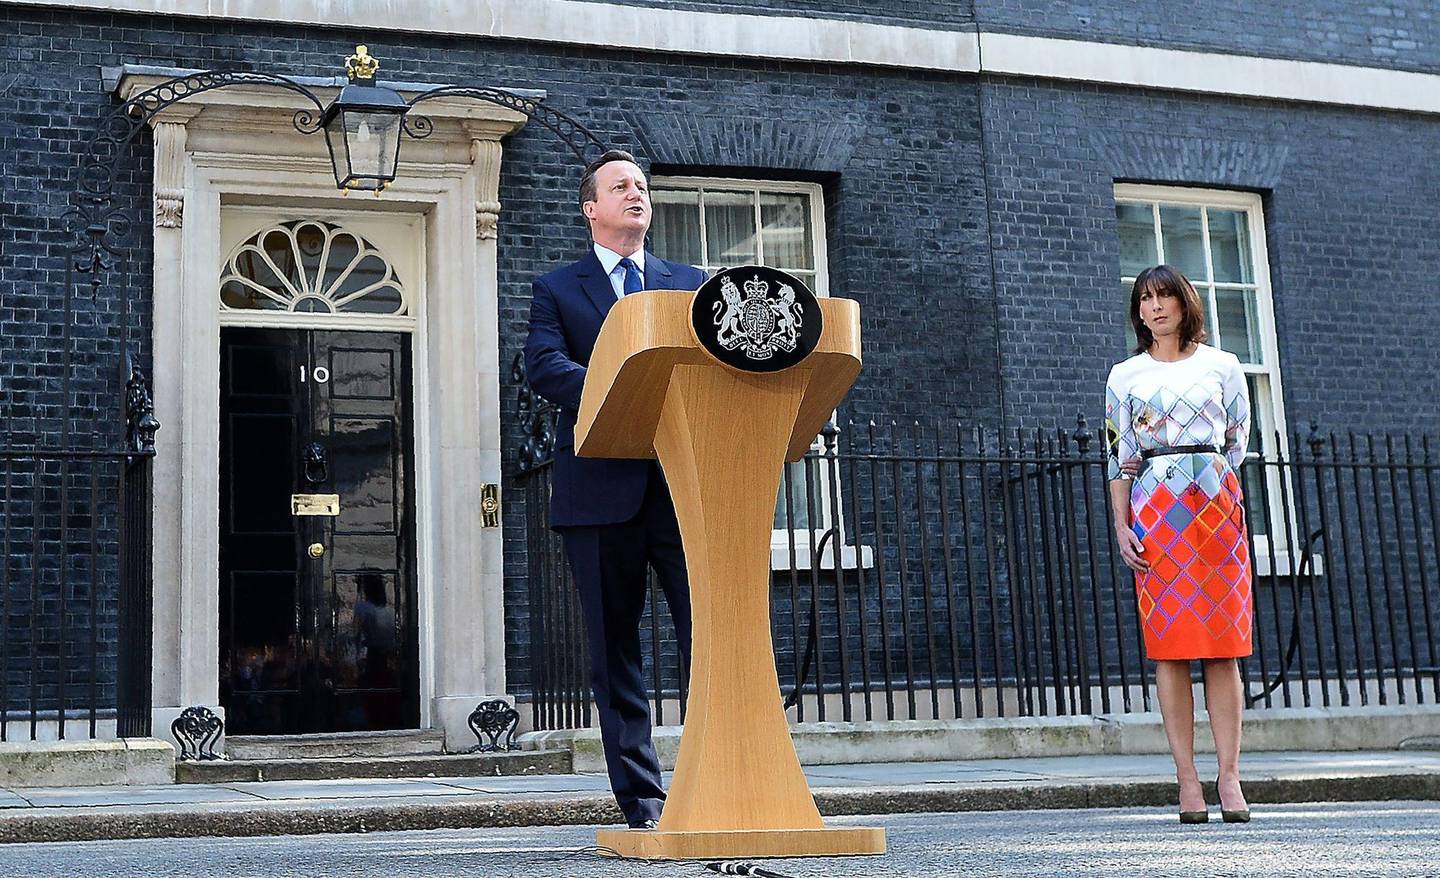 British Prime Minister David Cameron (C) flanked his wife Samantha speaks to the press in front of 10 Downing street in central London on June 24, 2016.
Britain has voted to break out of the European Union, striking a thunderous blow against the bloc and spreading panic through world markets Friday as sterling collapsed to a 31-year low. / AFP PHOTO / BEN STANSALL